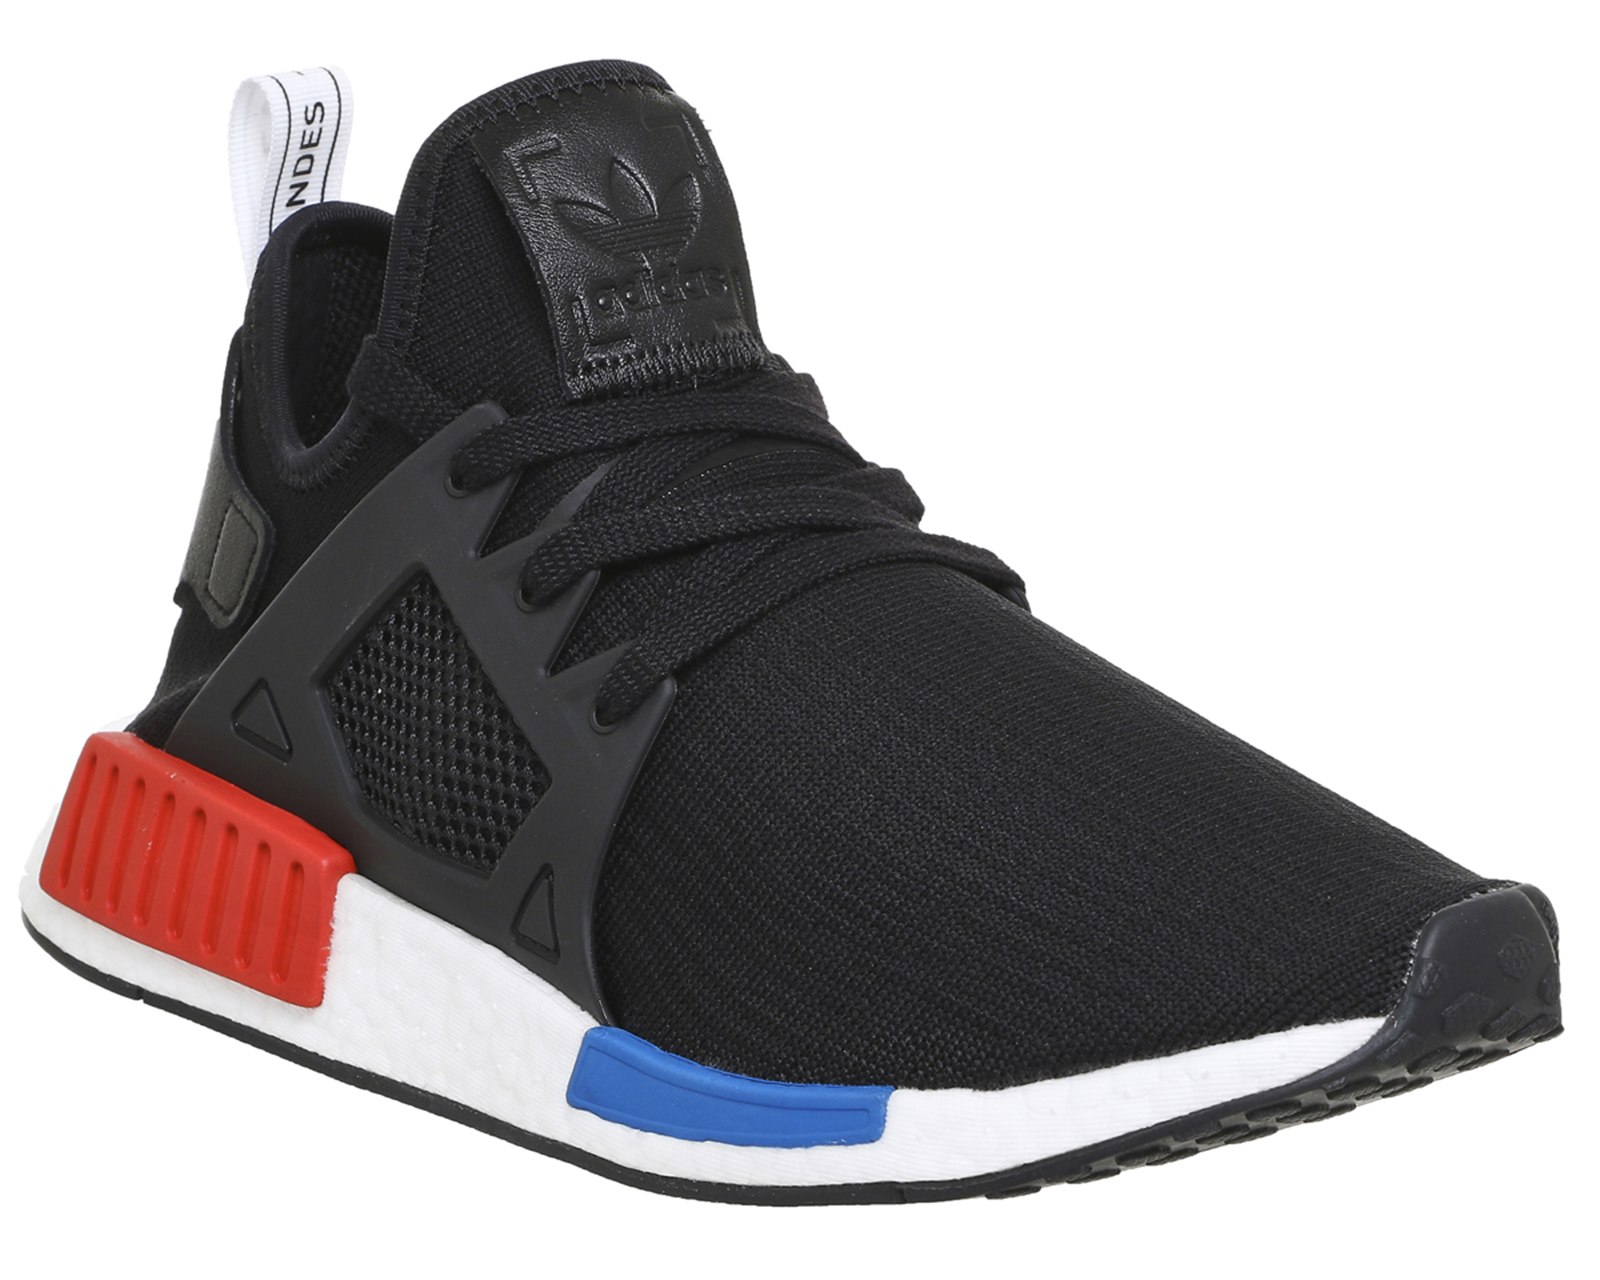 adidas nmd r1 red and black